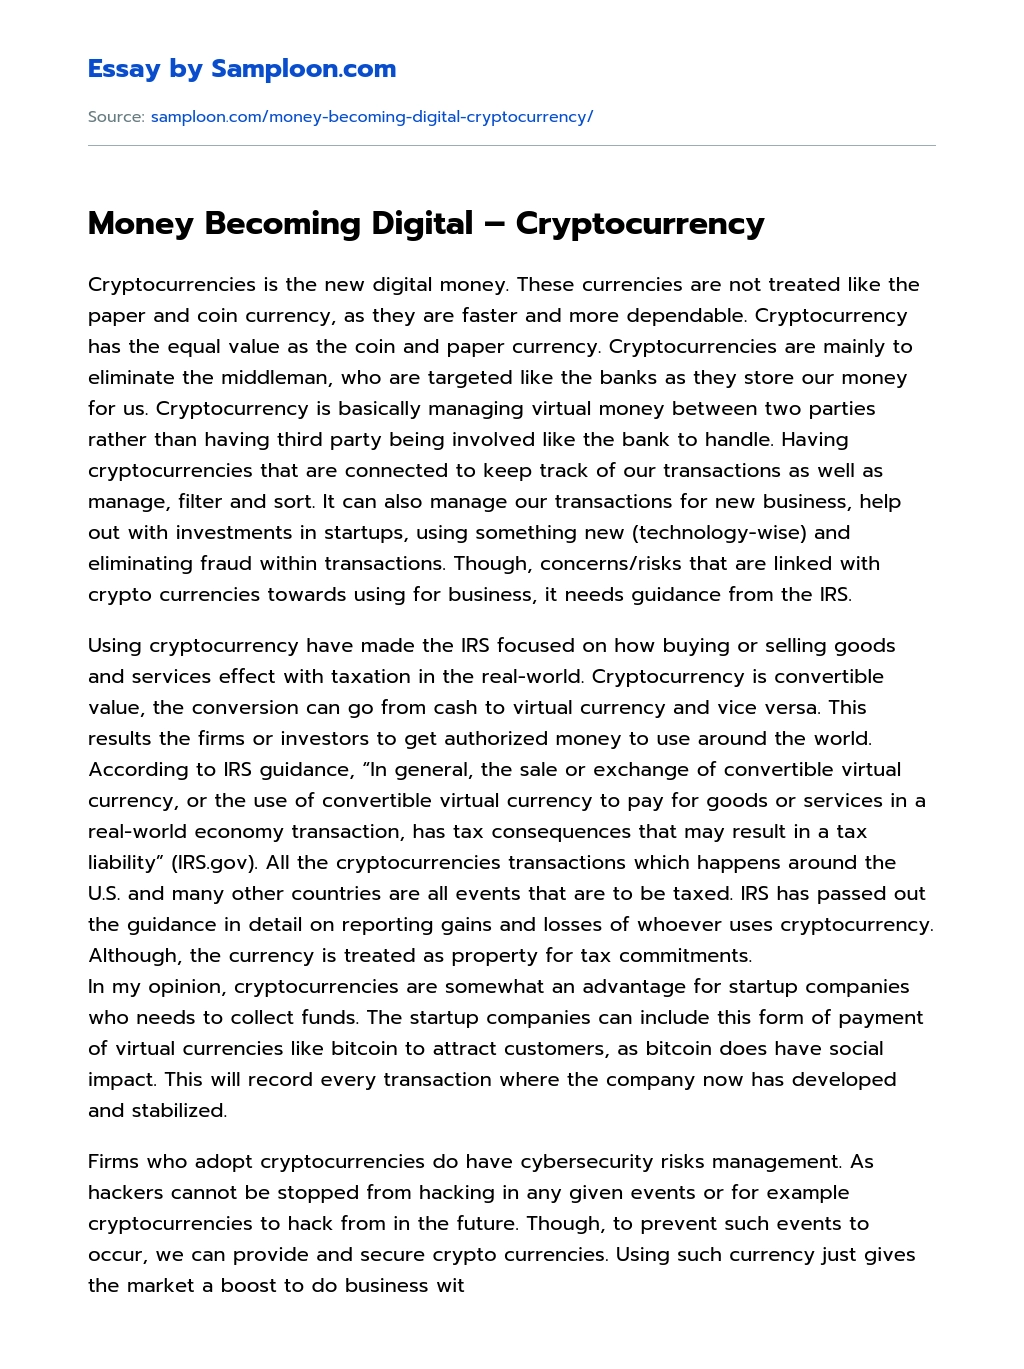 Money Becoming Digital – Cryptocurrency essay